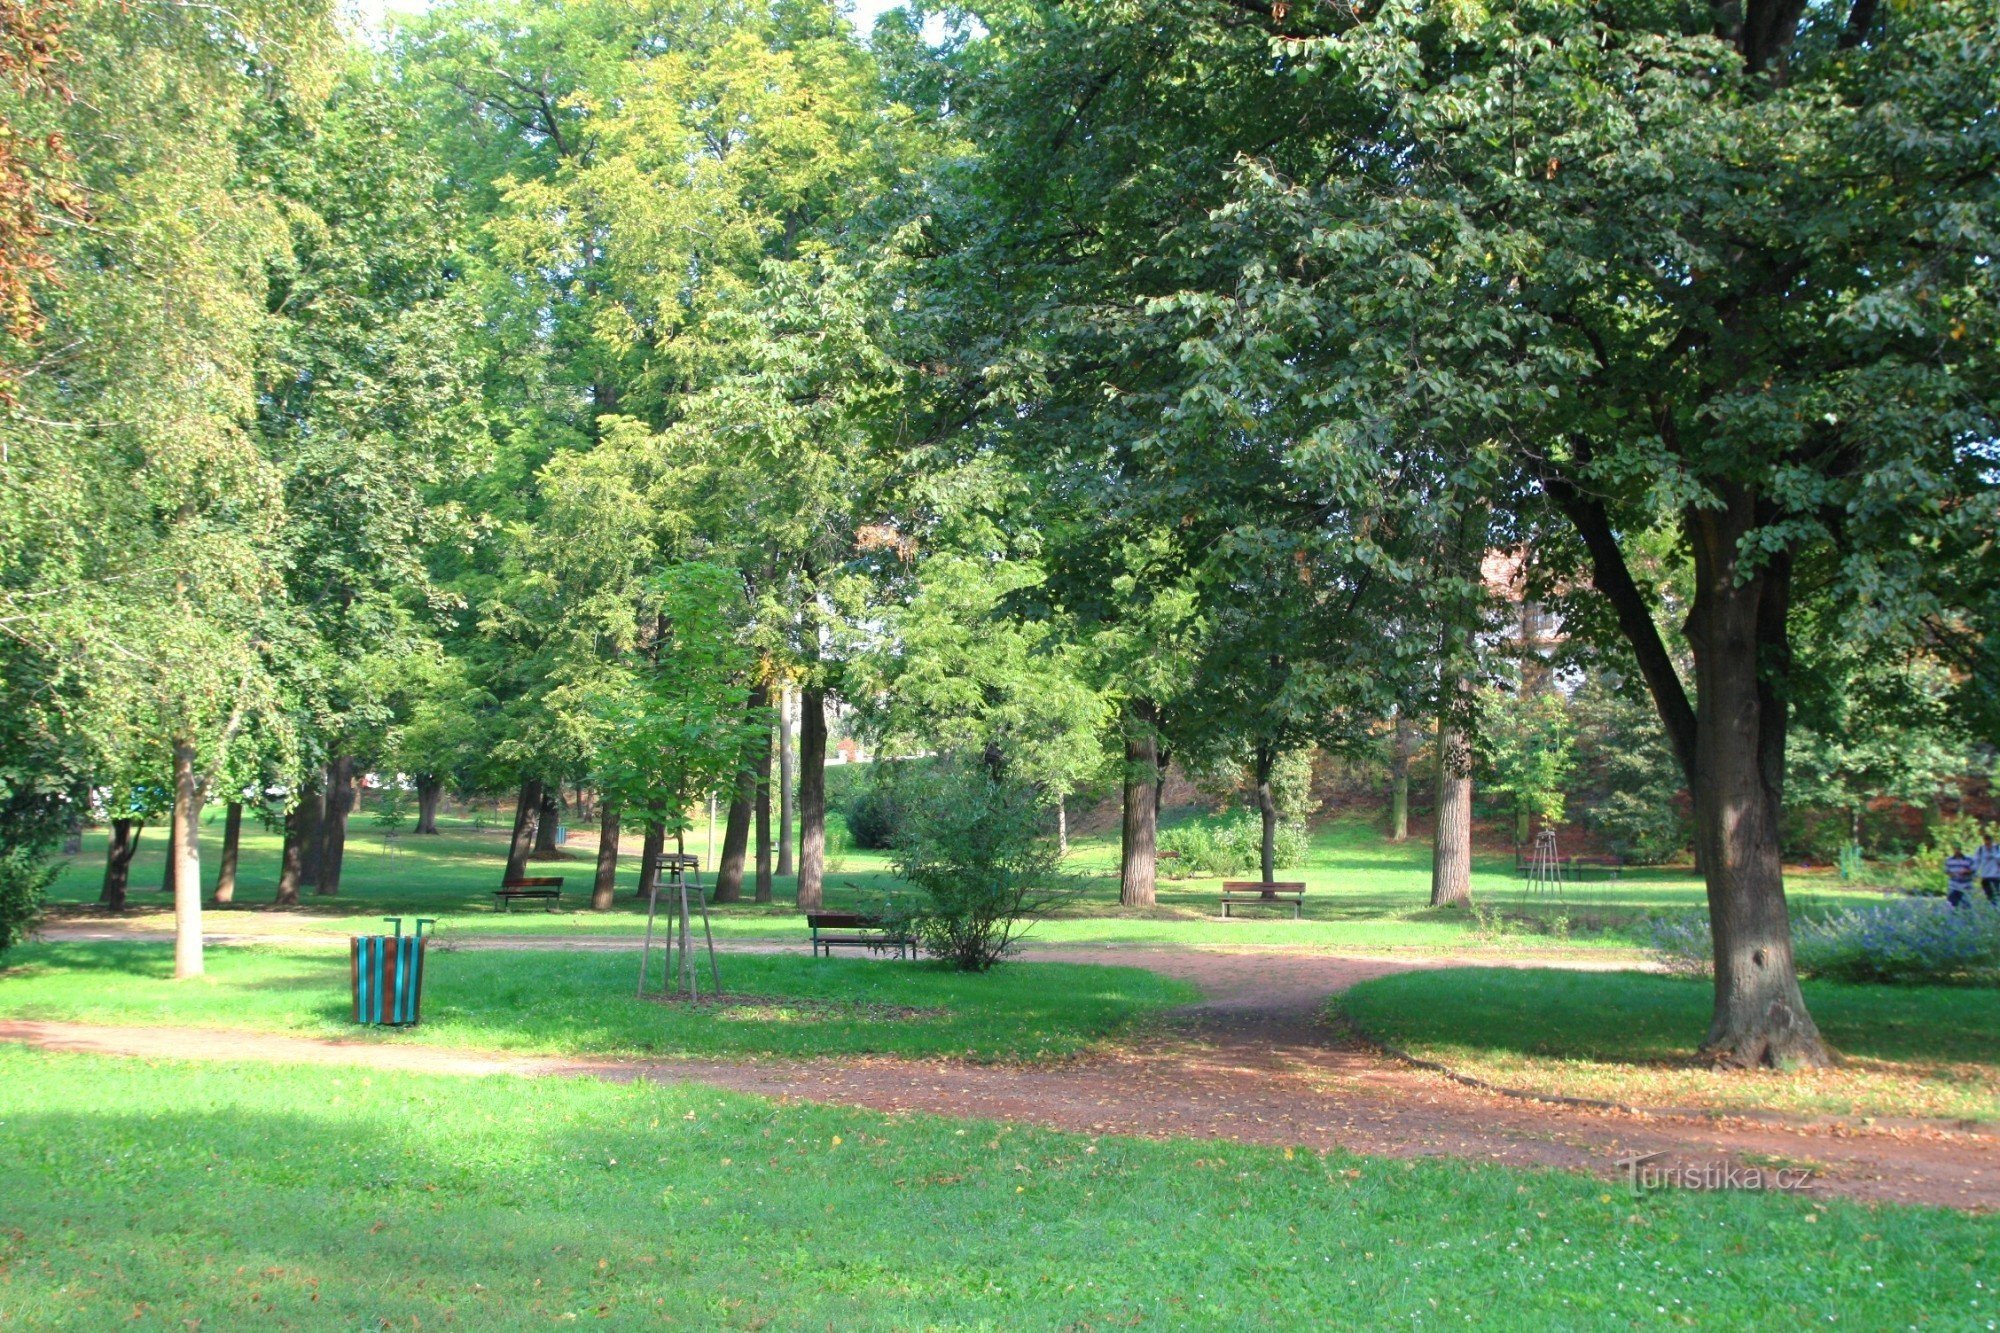 View to the park